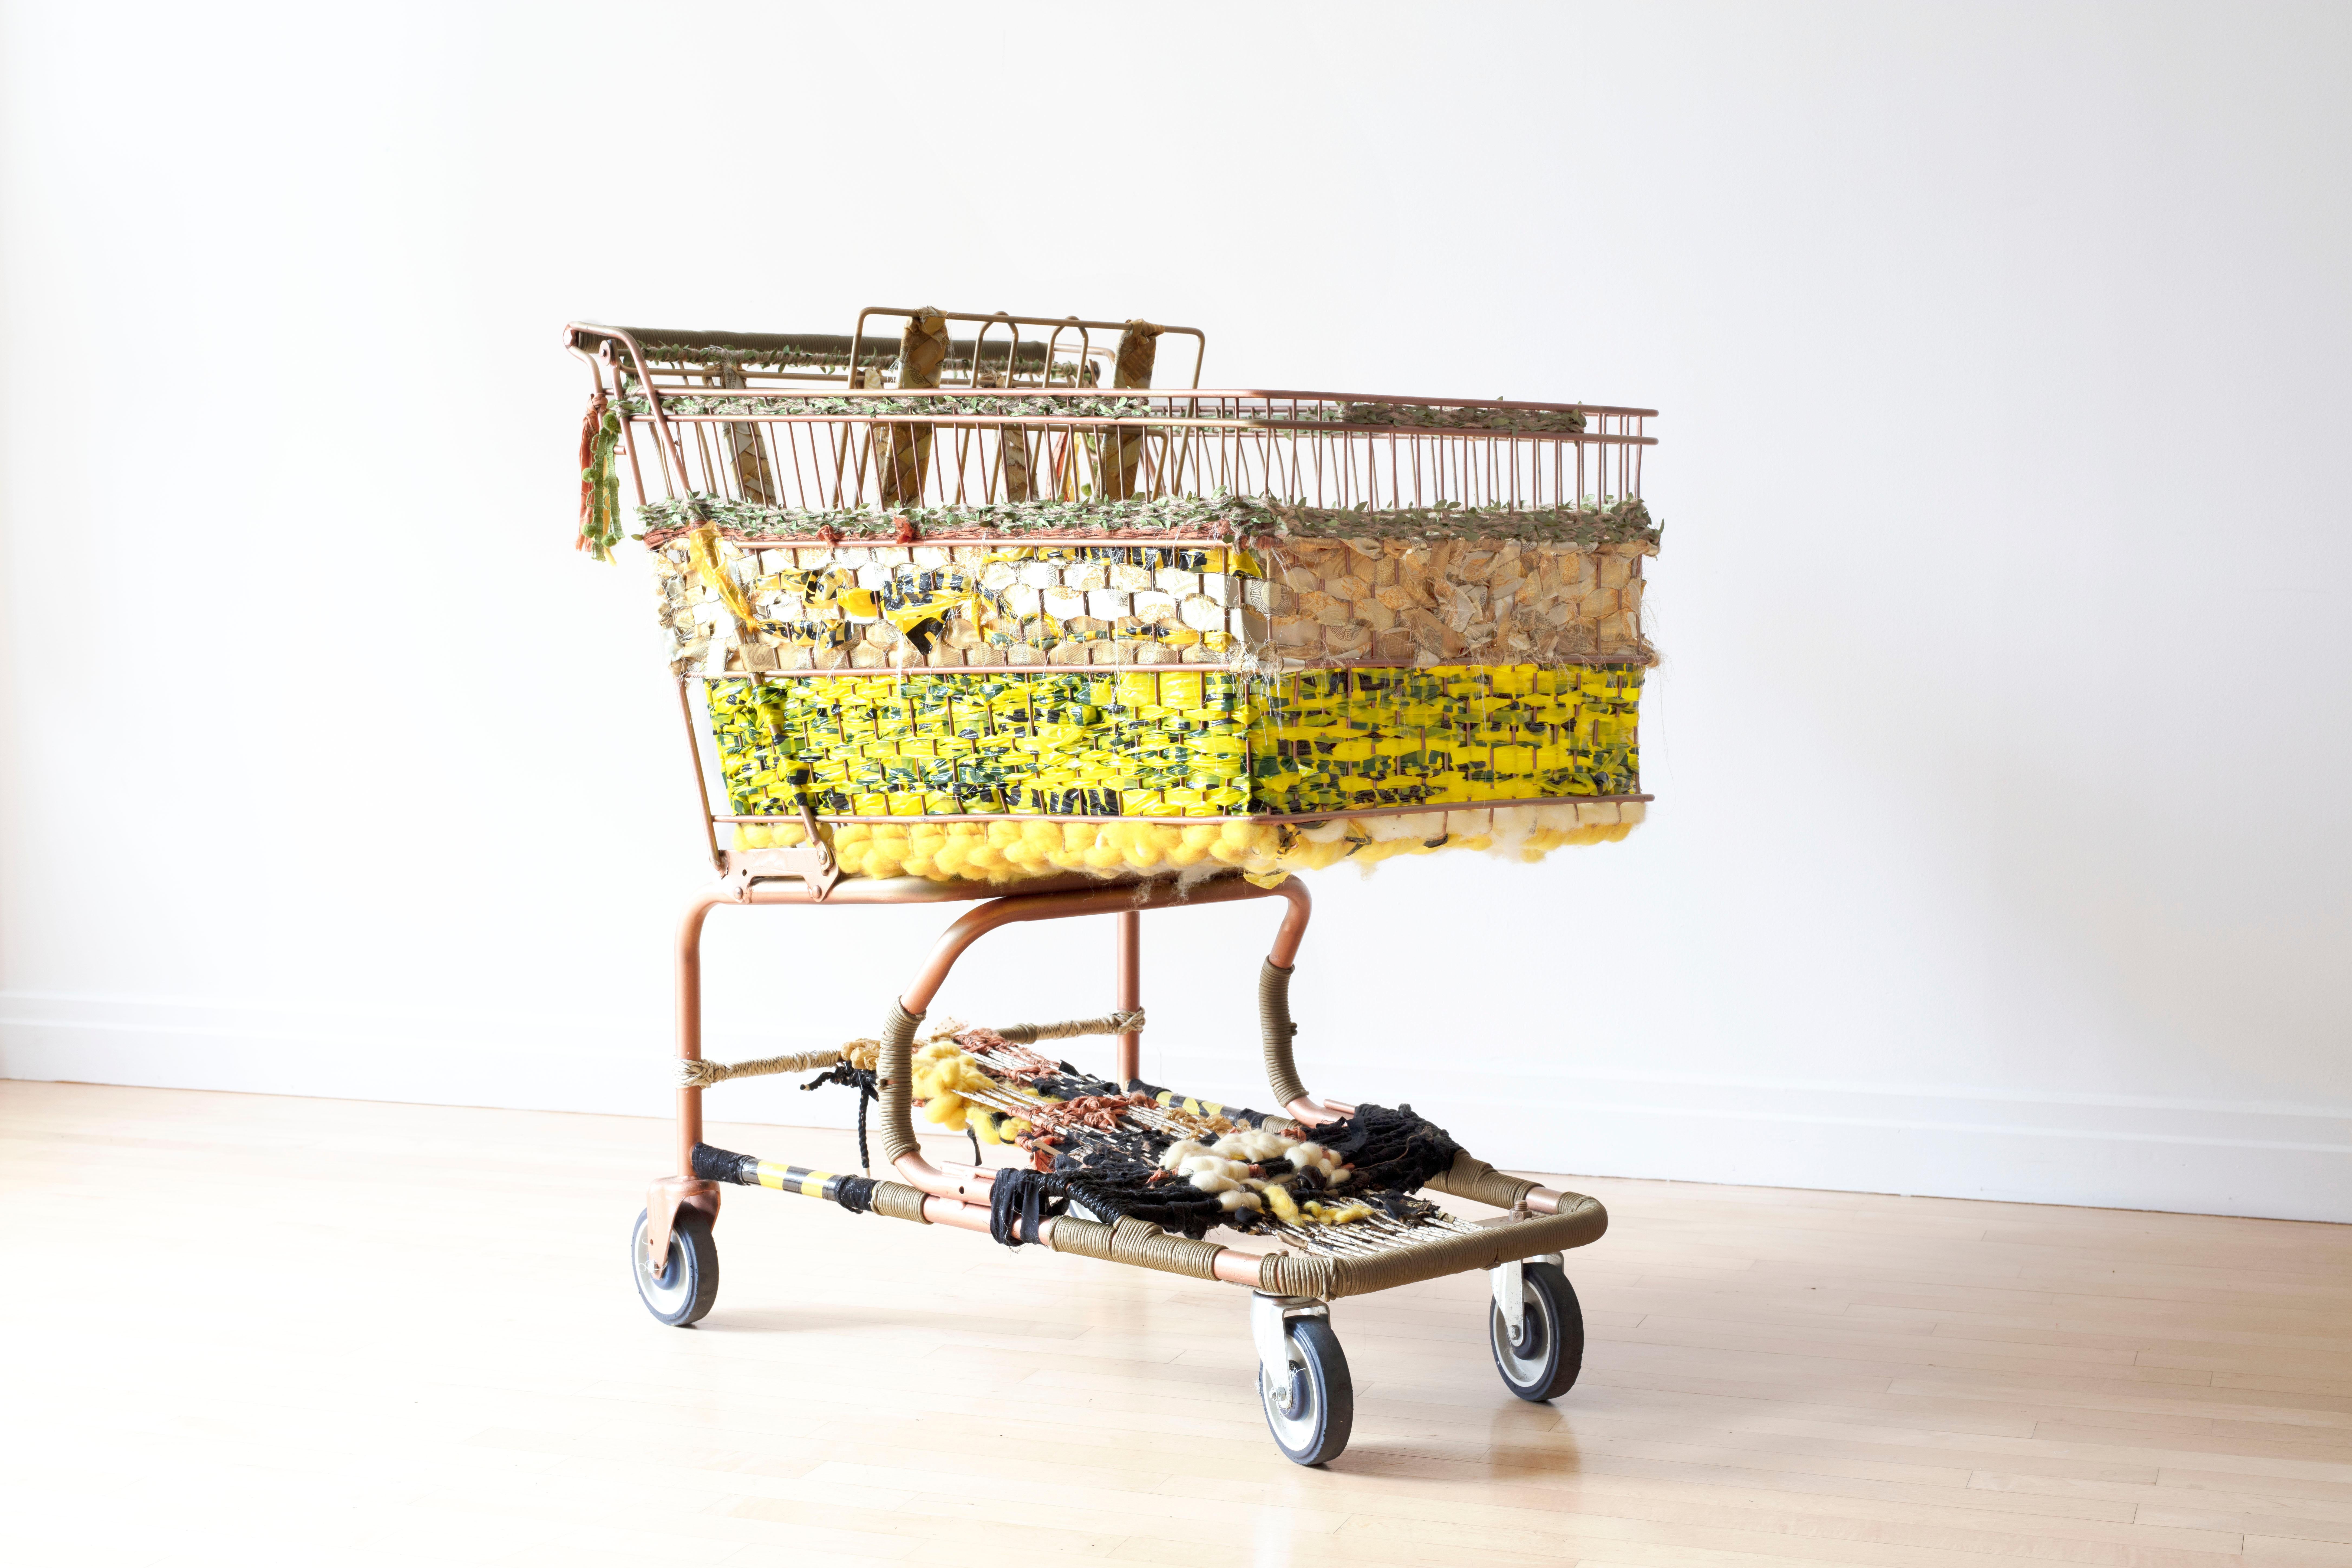 Theda Sandiford Abstract Sculpture - Large Scale Sculpture: 'Caution Cart' Emotional Baggage Cart 